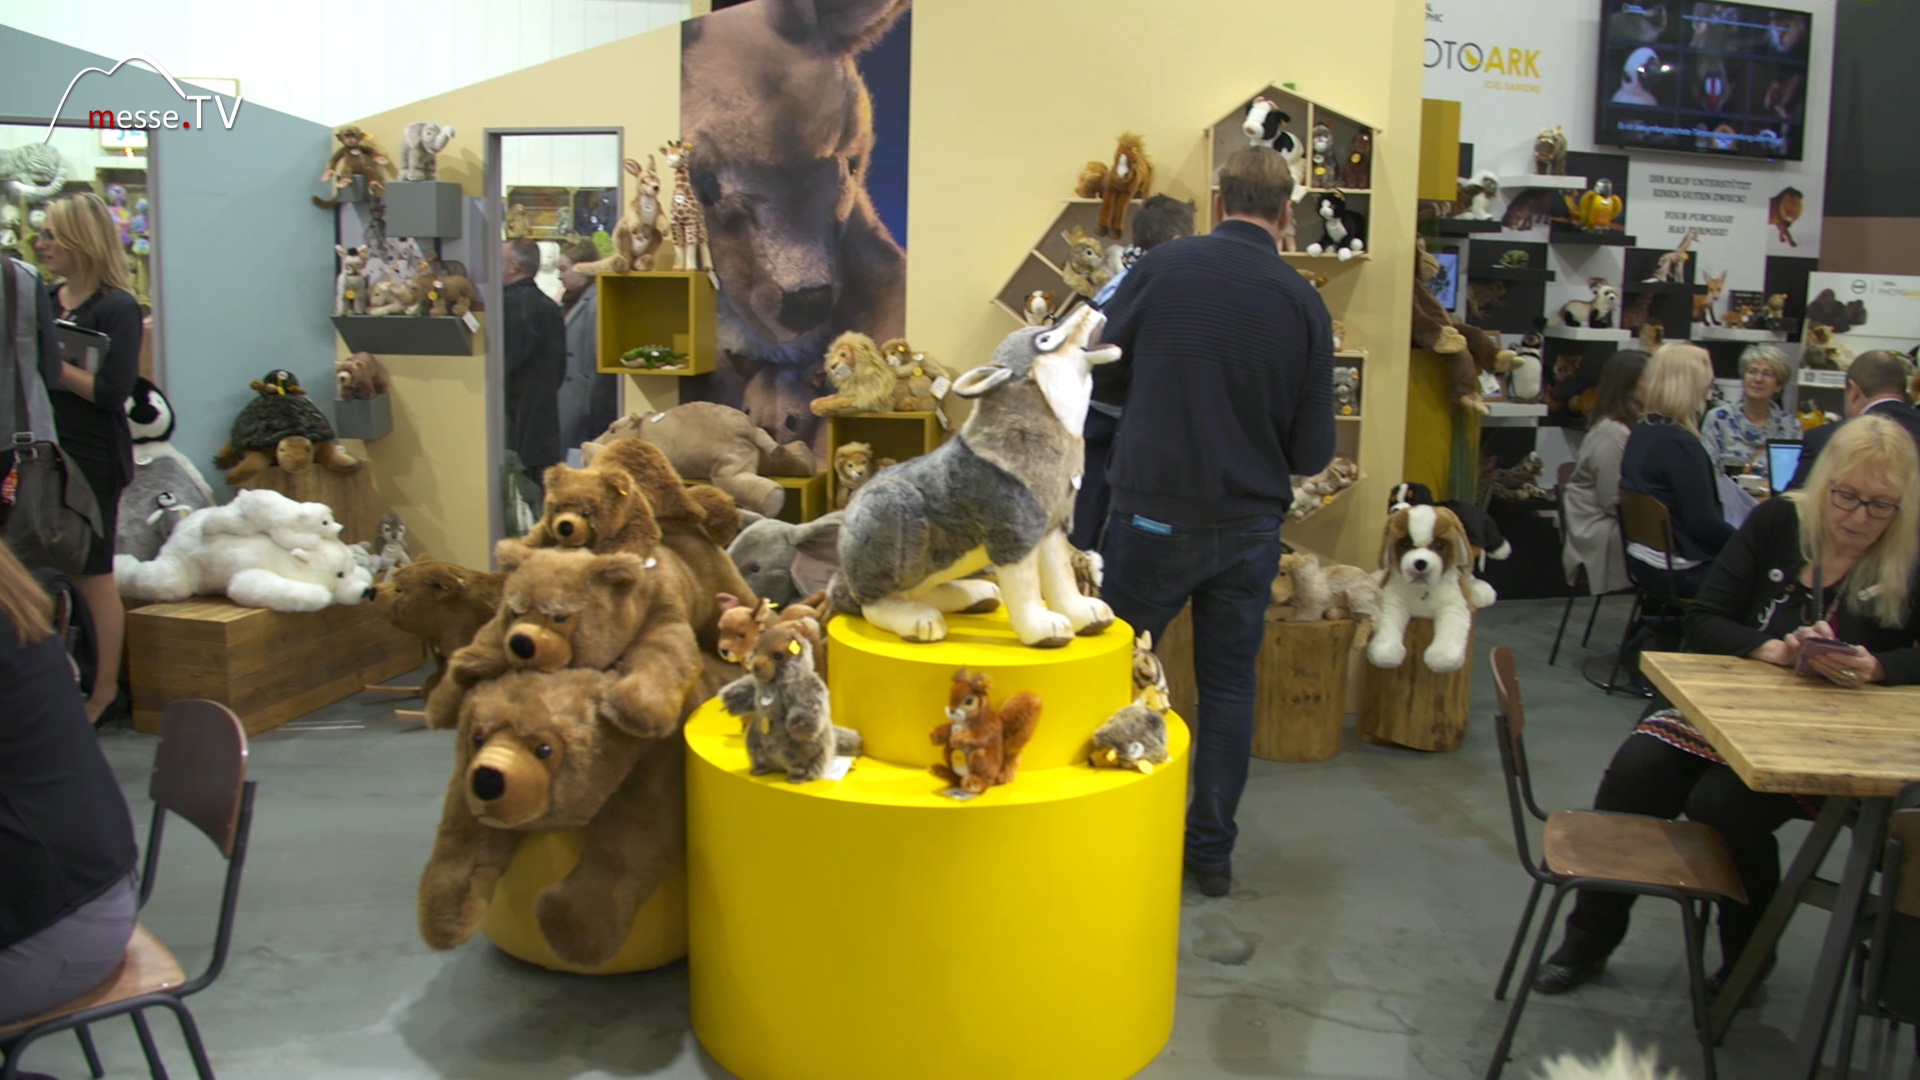 Steiff appearance at the Spielwarenmesse 2020 Nuremberg